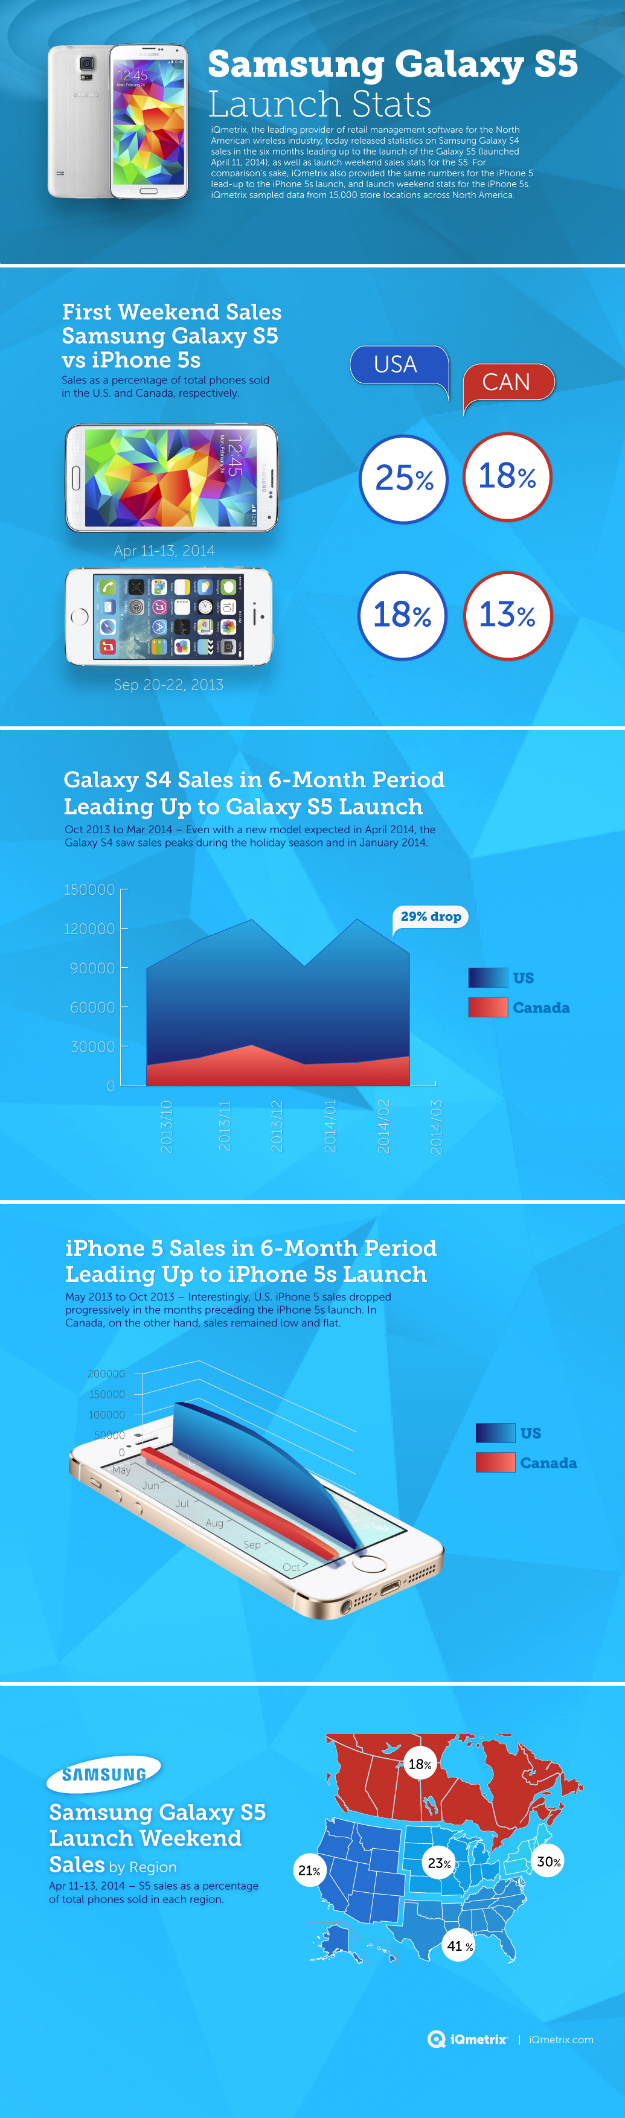 galaxy-s5-vs-iphone-5s-infographic-1